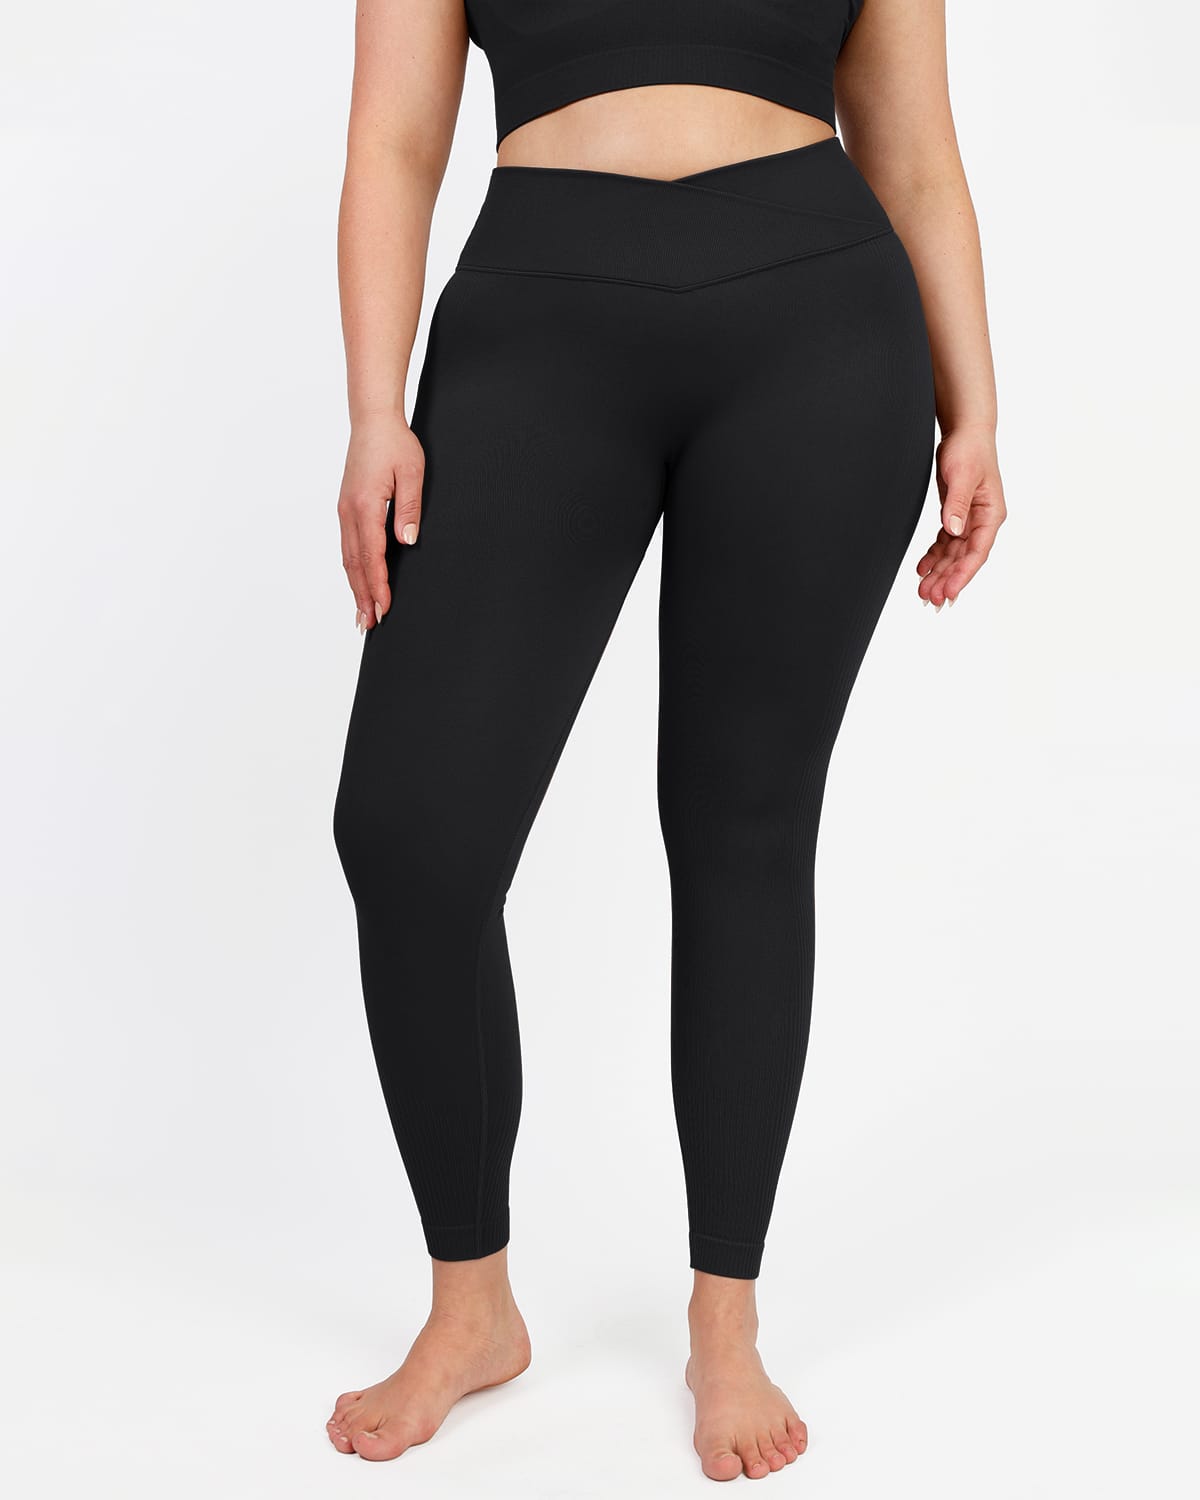 Fuel your workout intensity with the Cosmolle Seamless Crossover